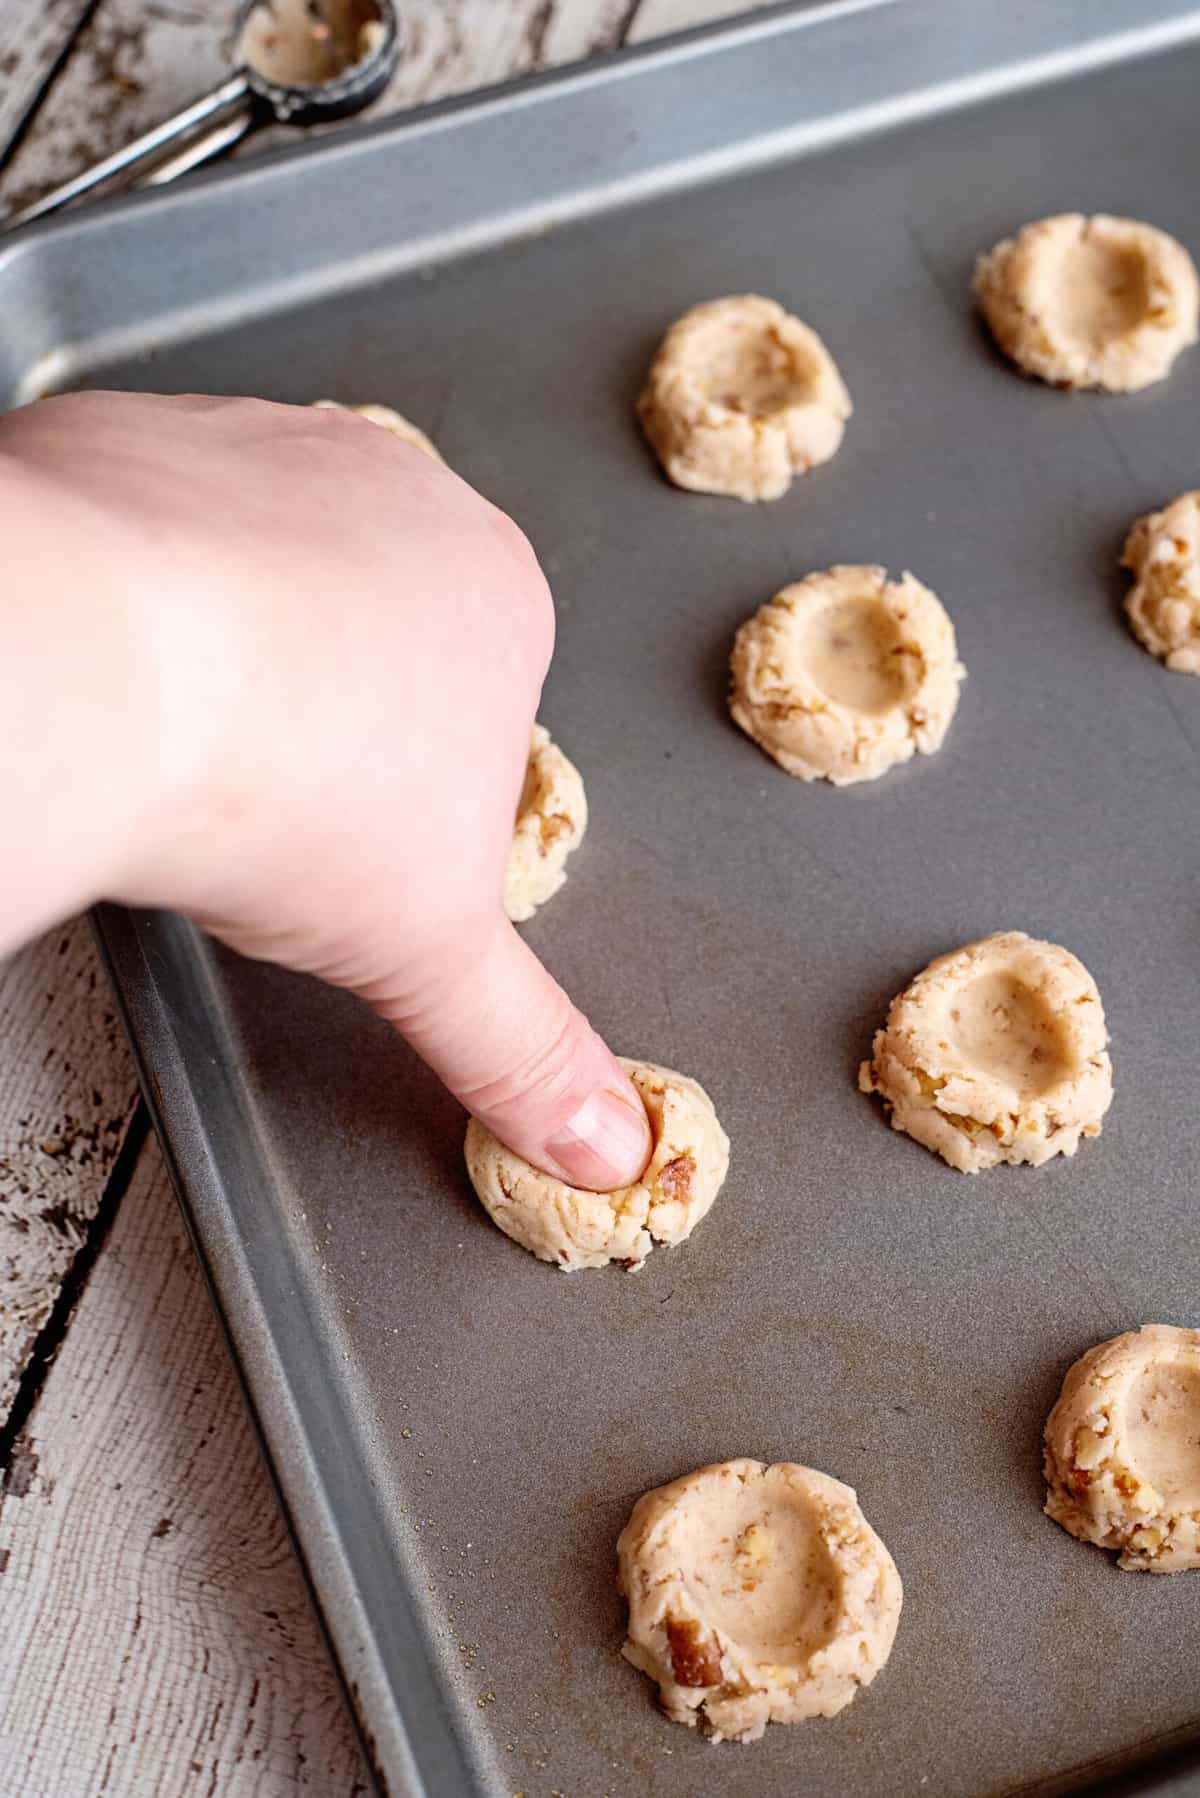 dip thumb into flour and make a print in each pecan thumbprint cookie